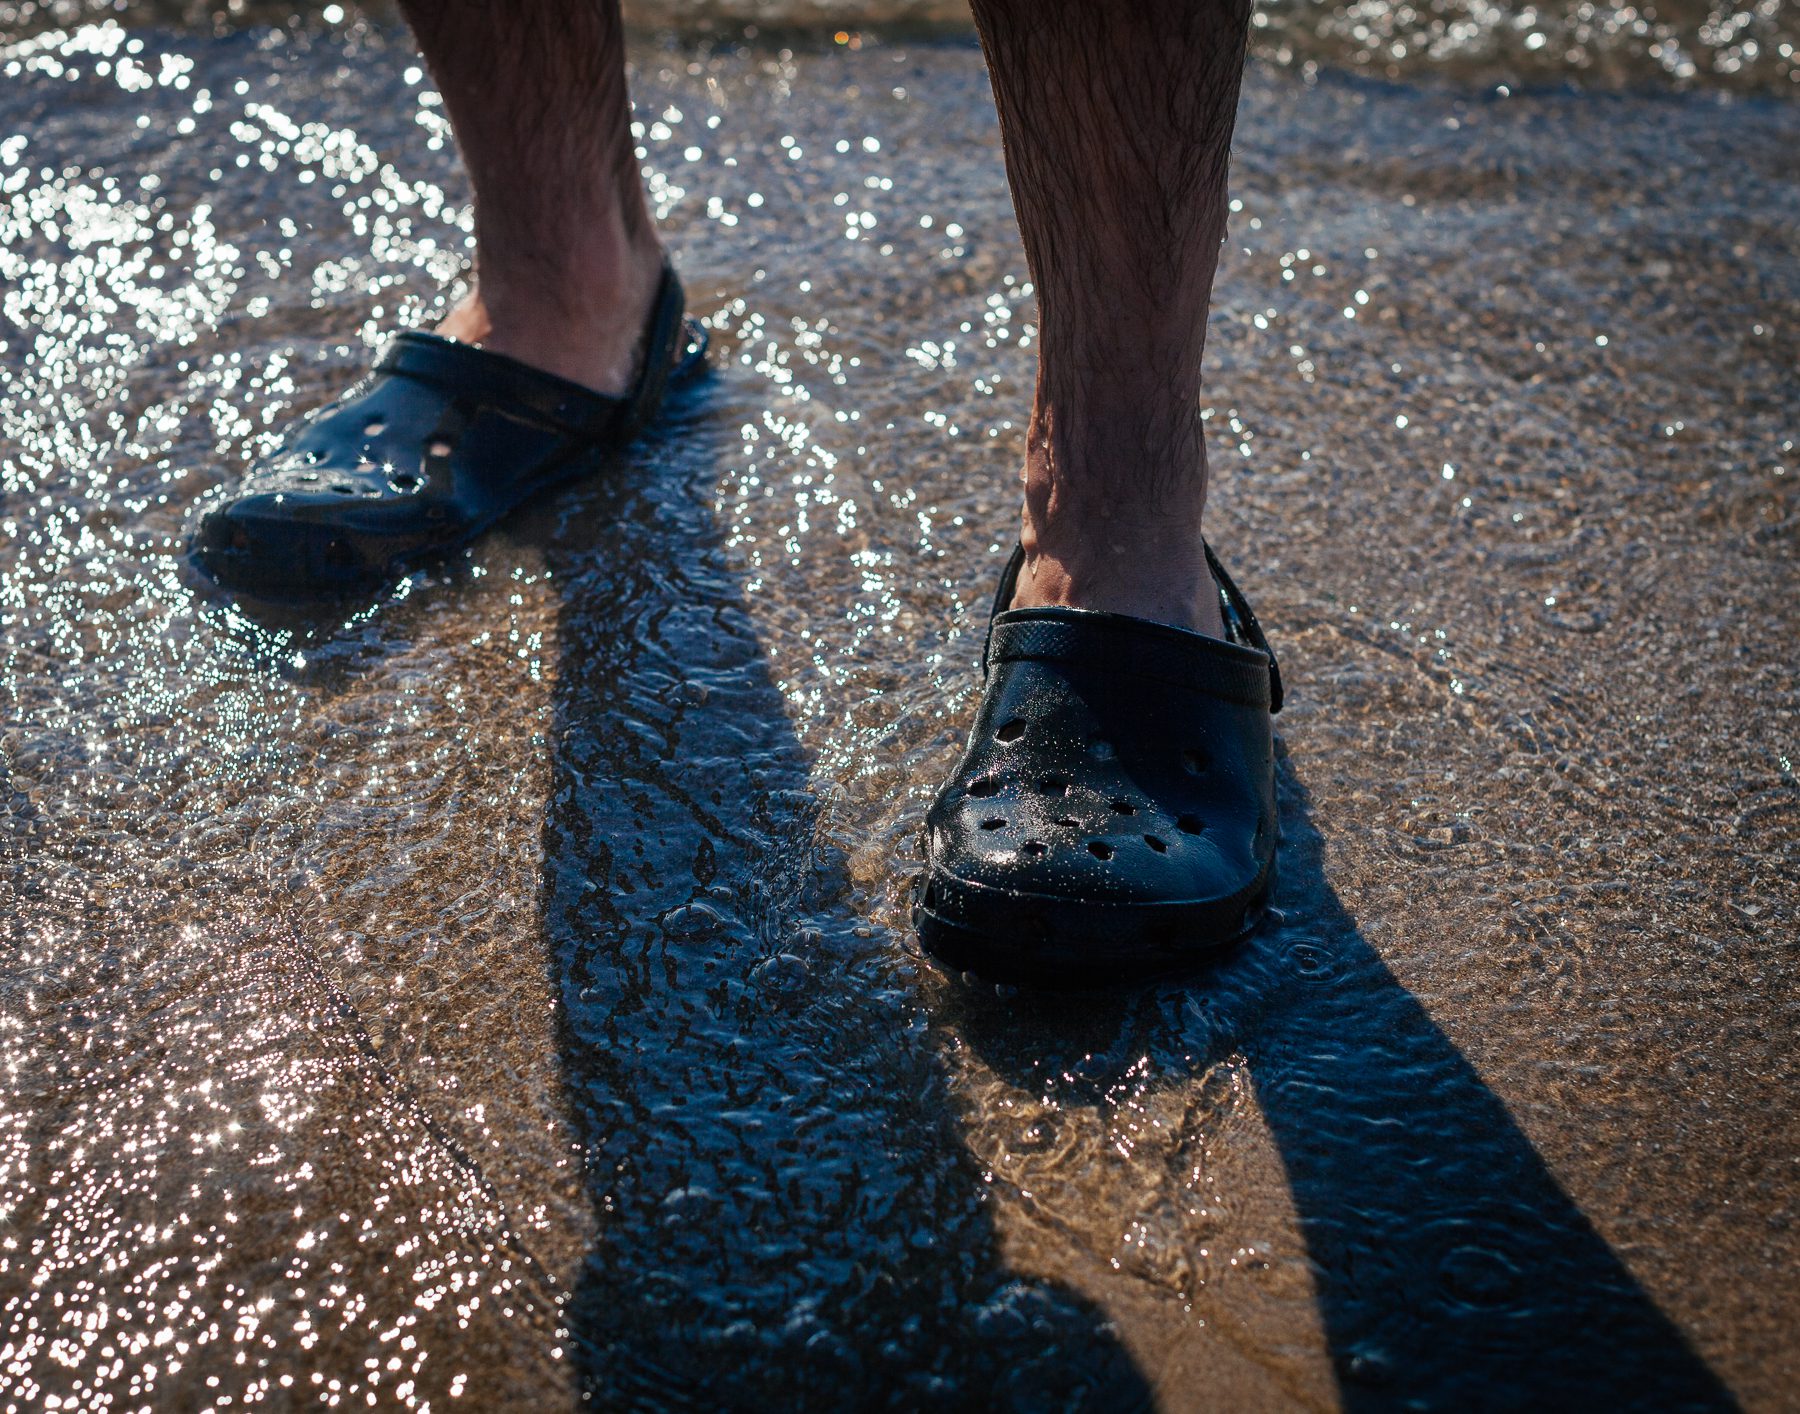 Todd always wears shoes in the water. He has learned his lesson from multiple cuts from sharp rocks and zebra mussels. “I have responded many times to calls for lacerations that people got not realizing how sharp zebra mussels can be.”